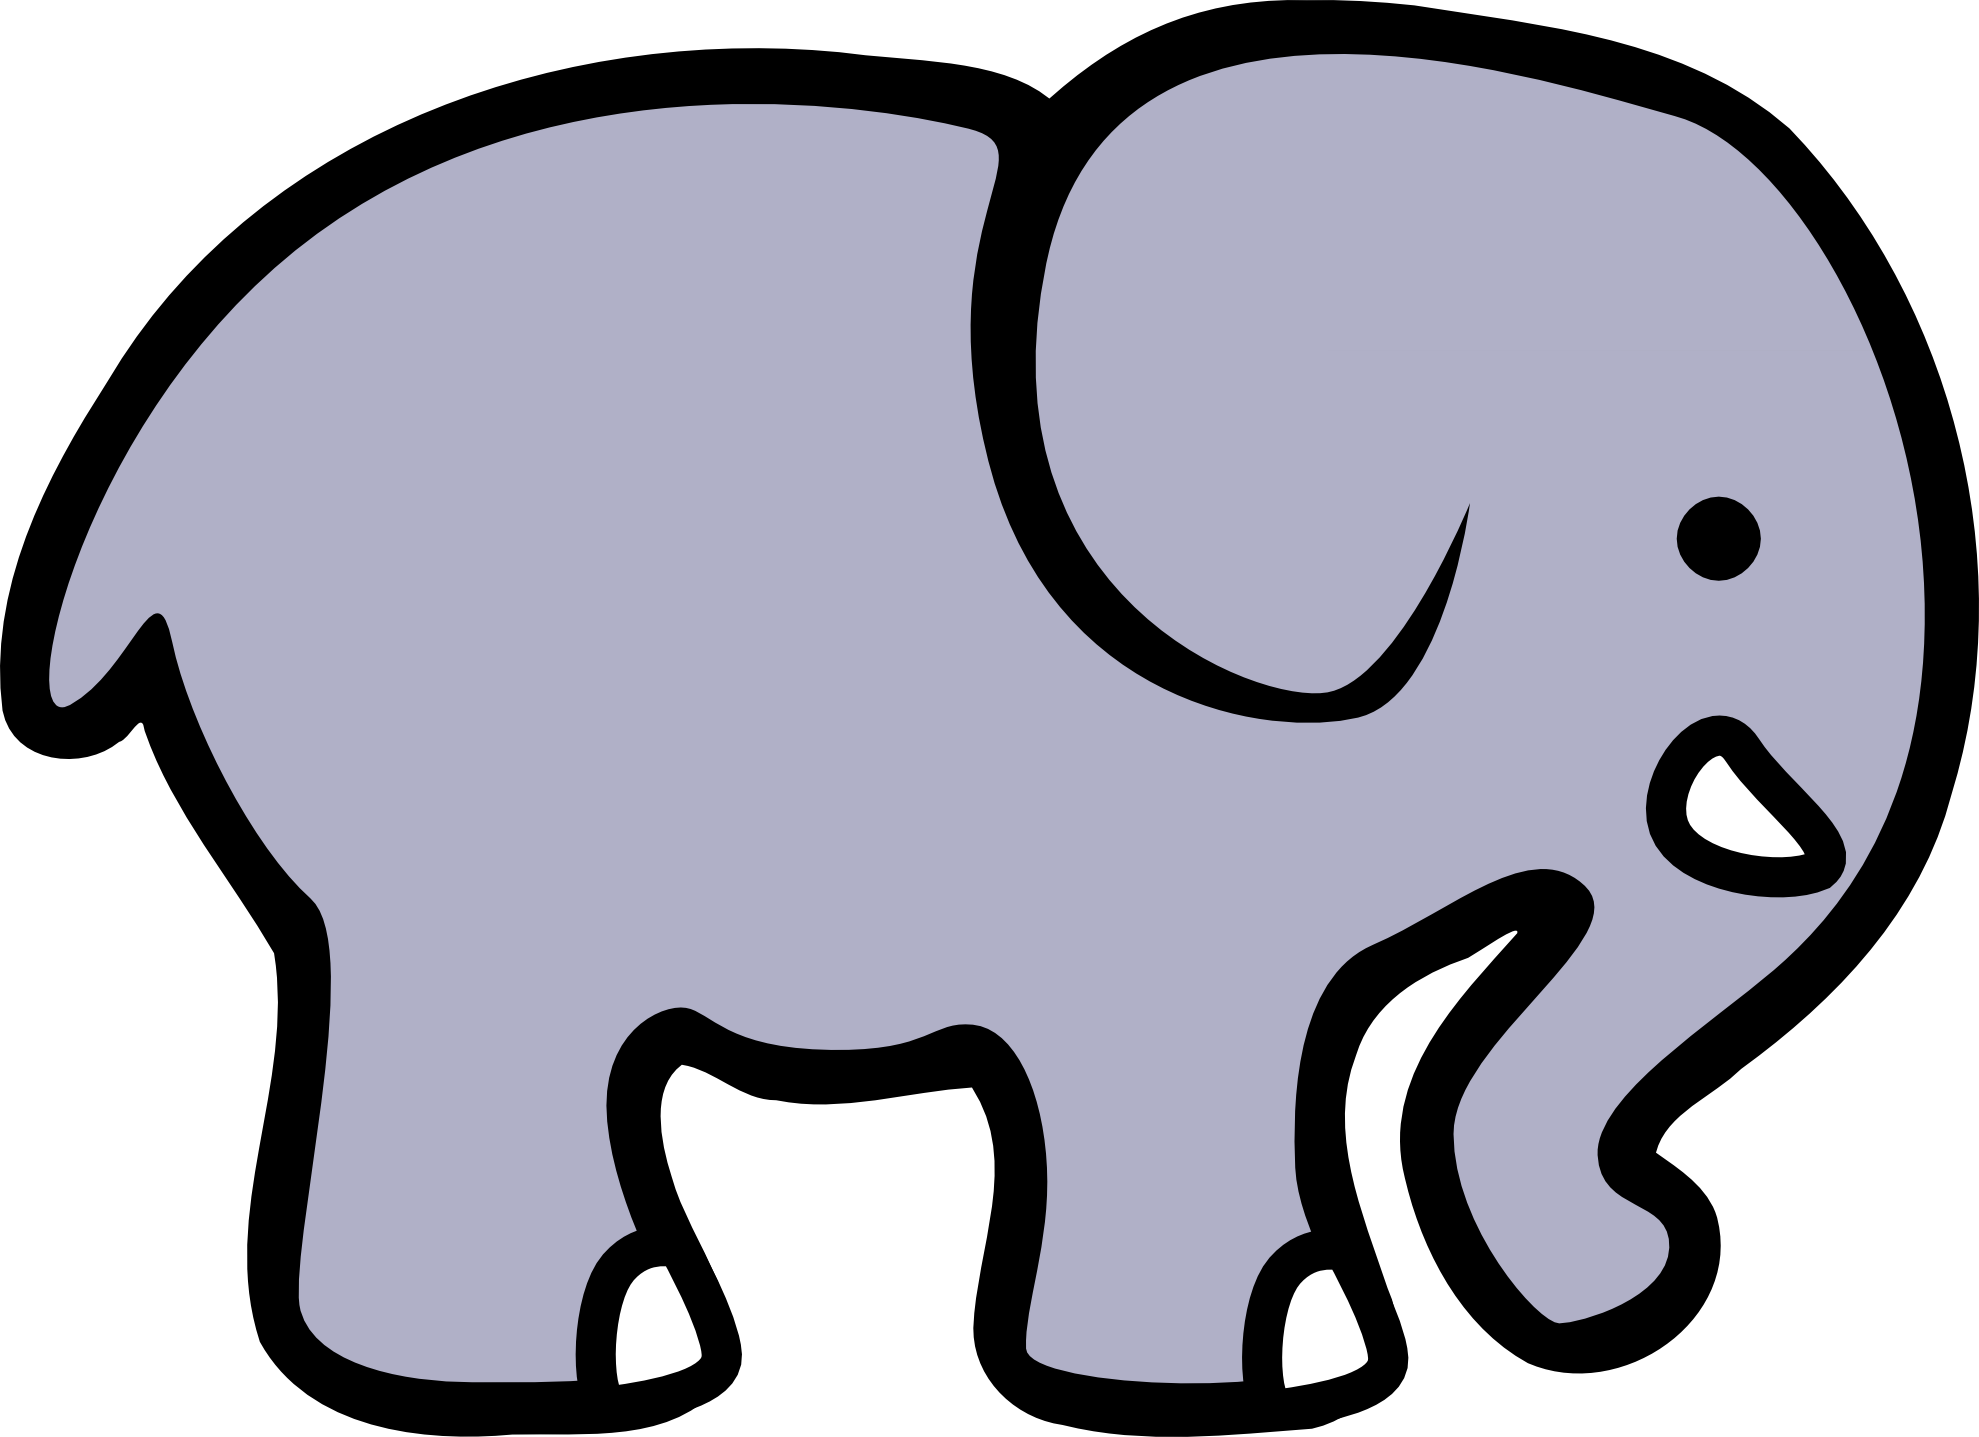 Elephant clip art black and white free clipart